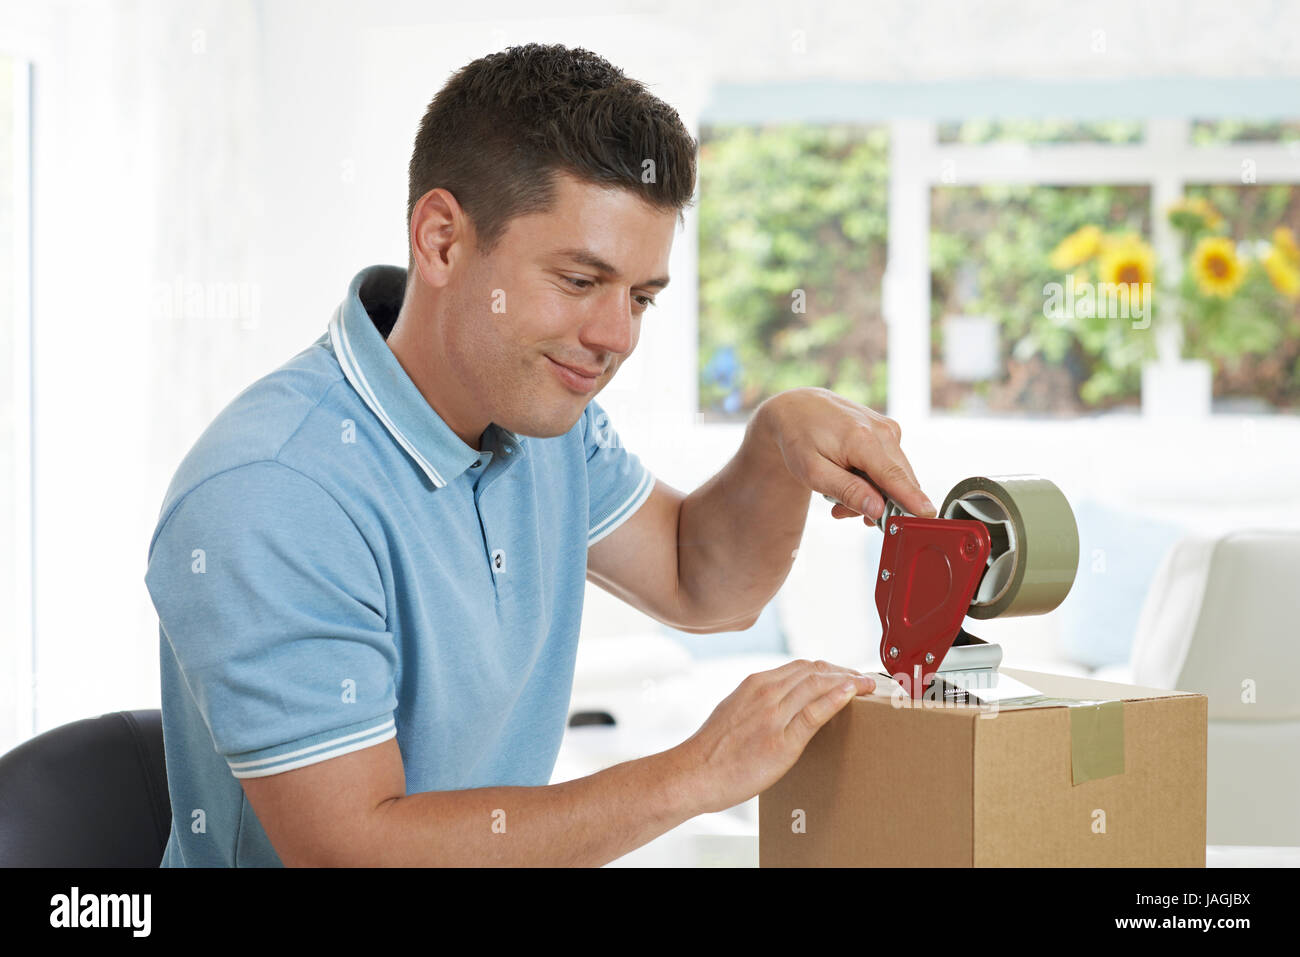 Man At Home Sealing Box For Dispatch Stock Photo